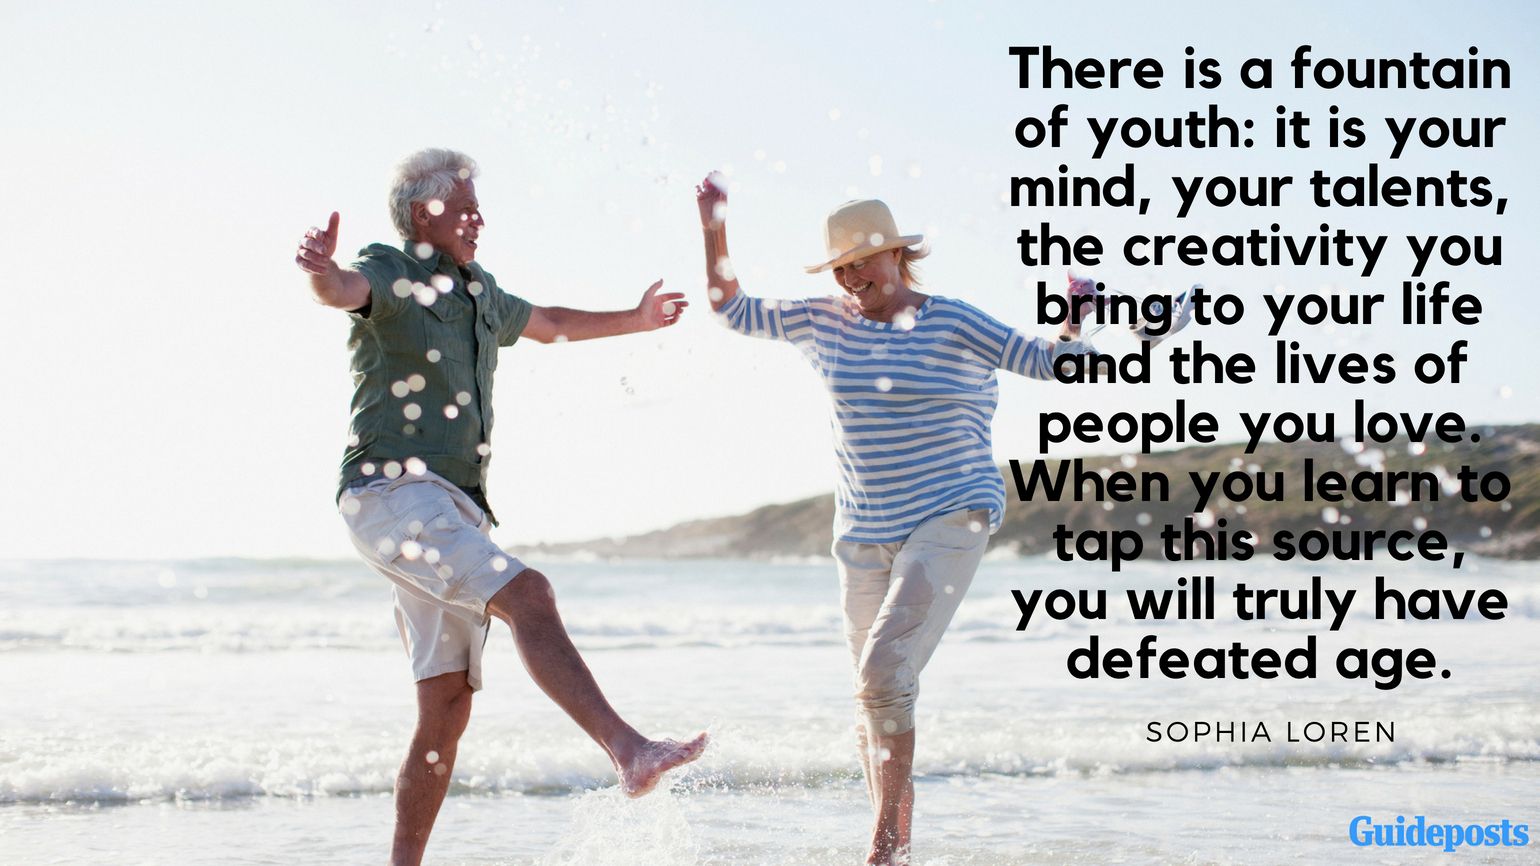 9 Inspirational Quotes for Retirement - Guideposts